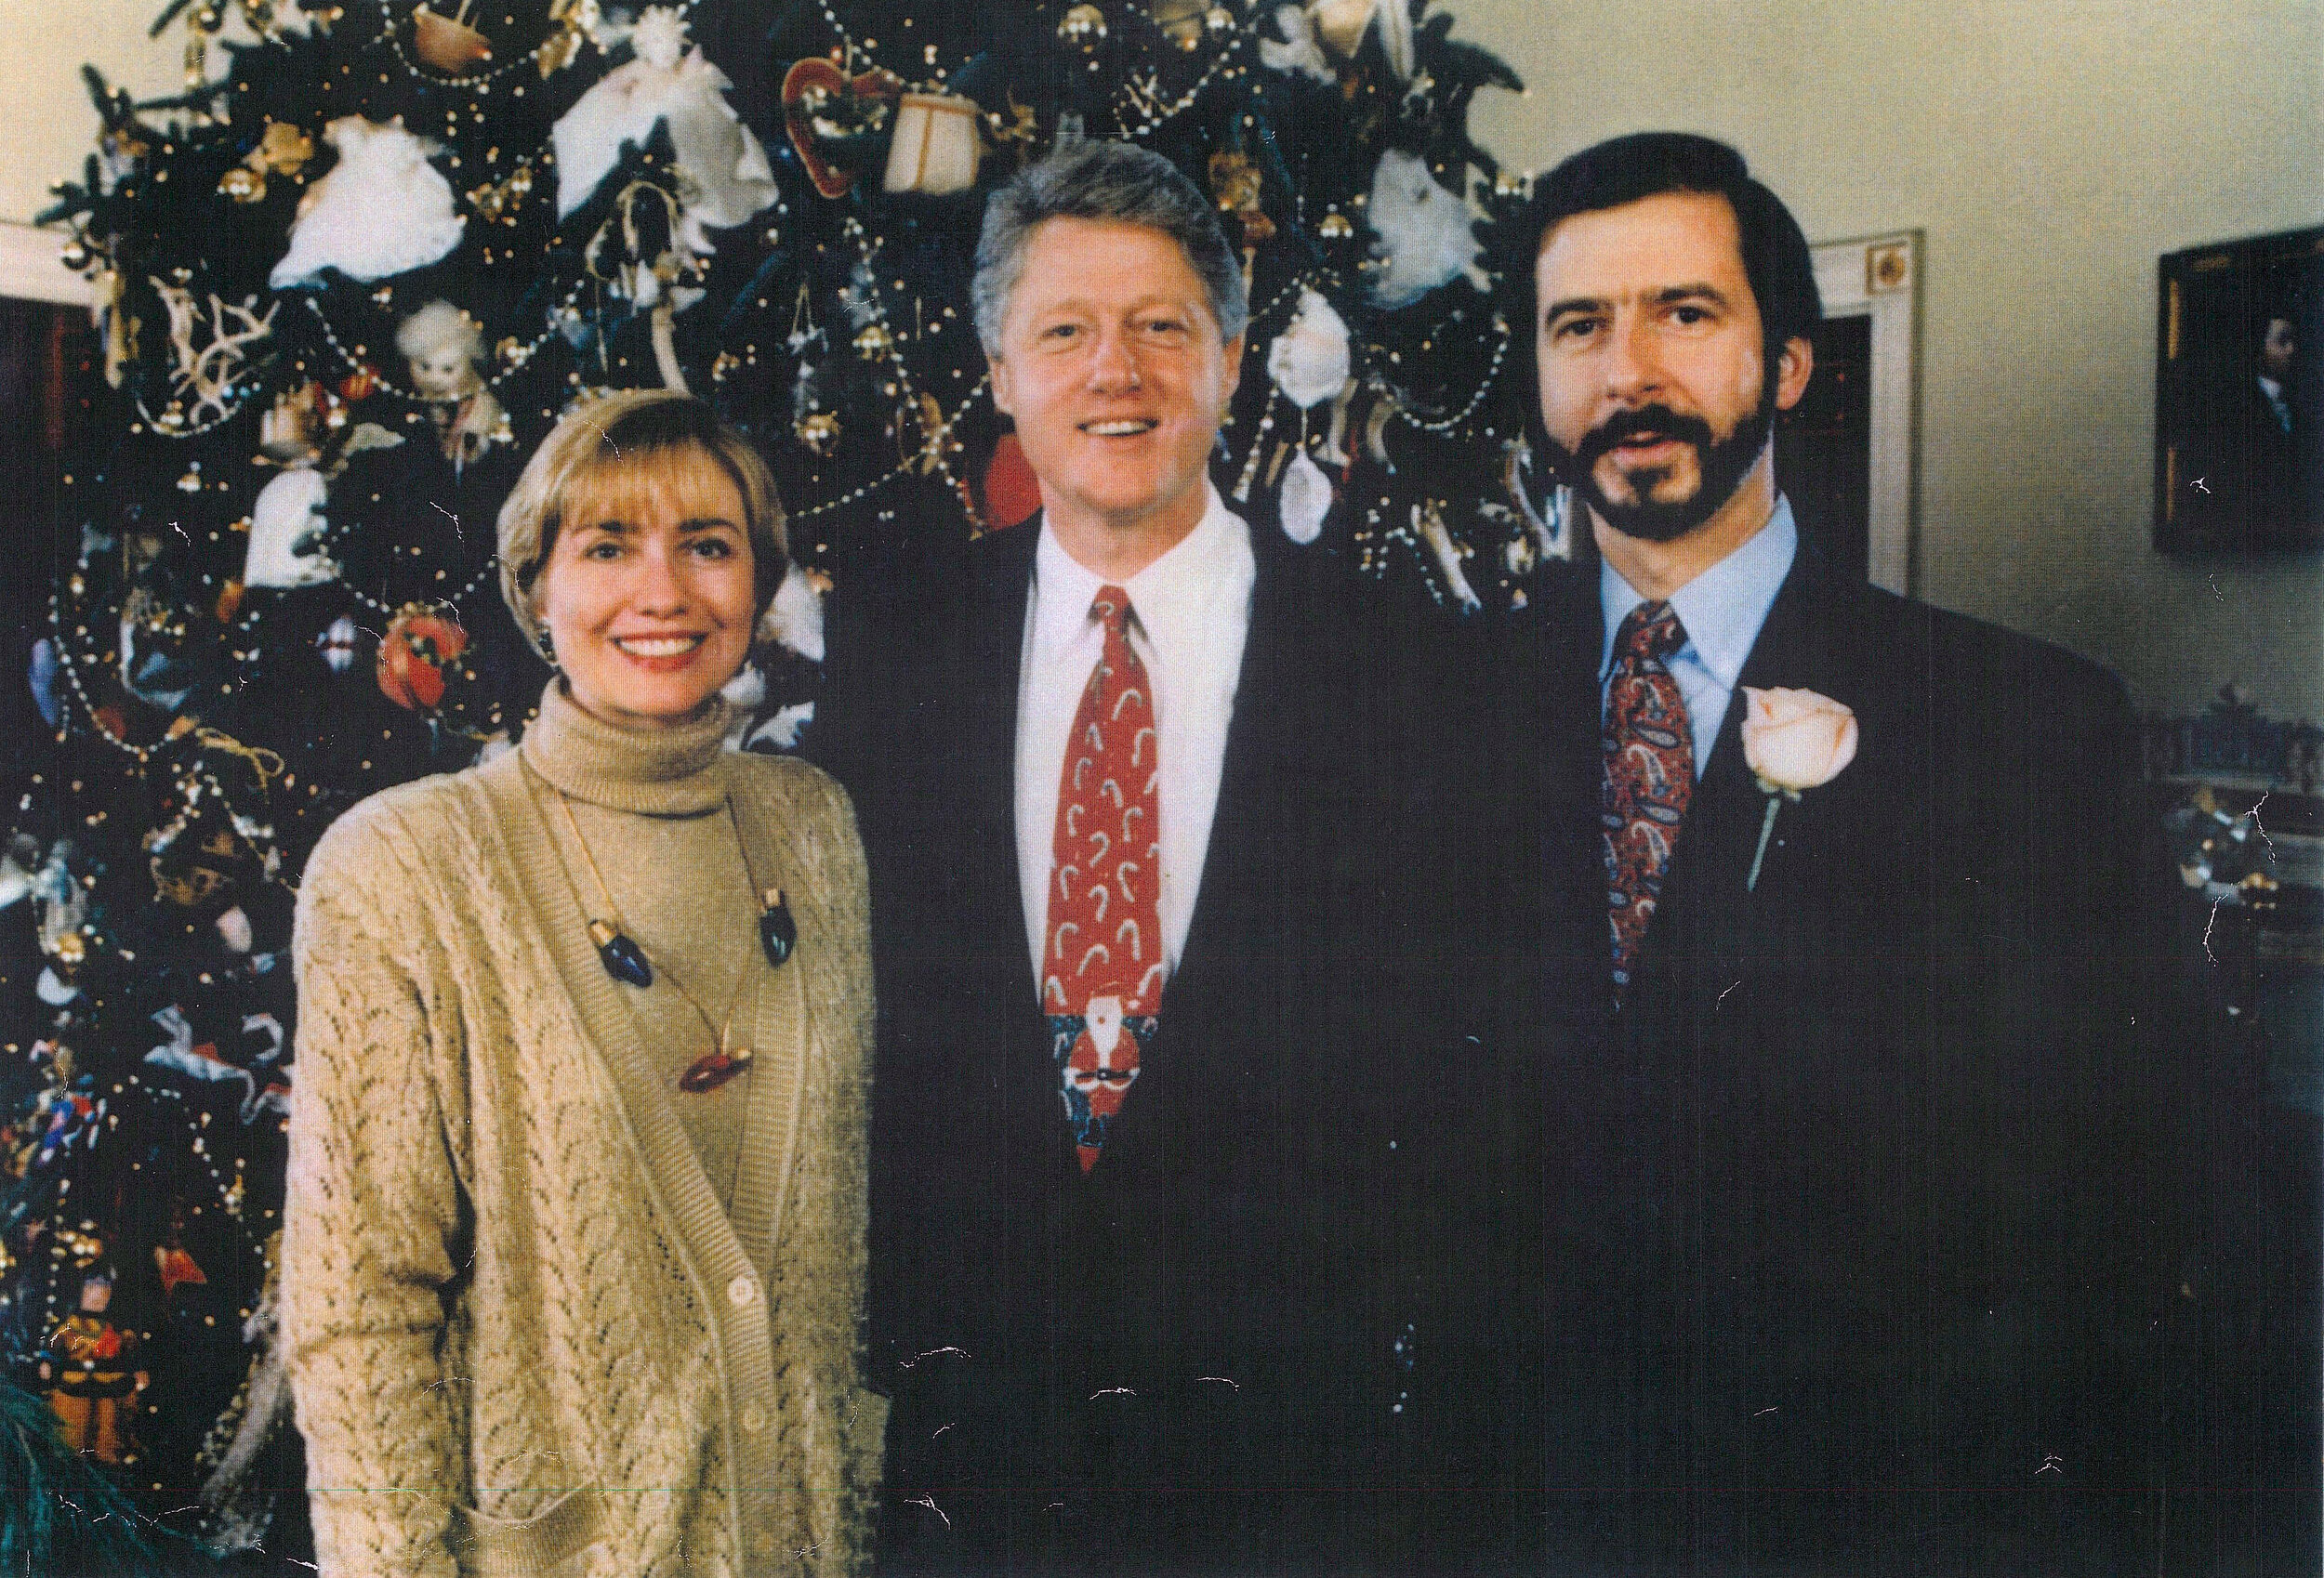 Kuhn with the Clintons.jpg